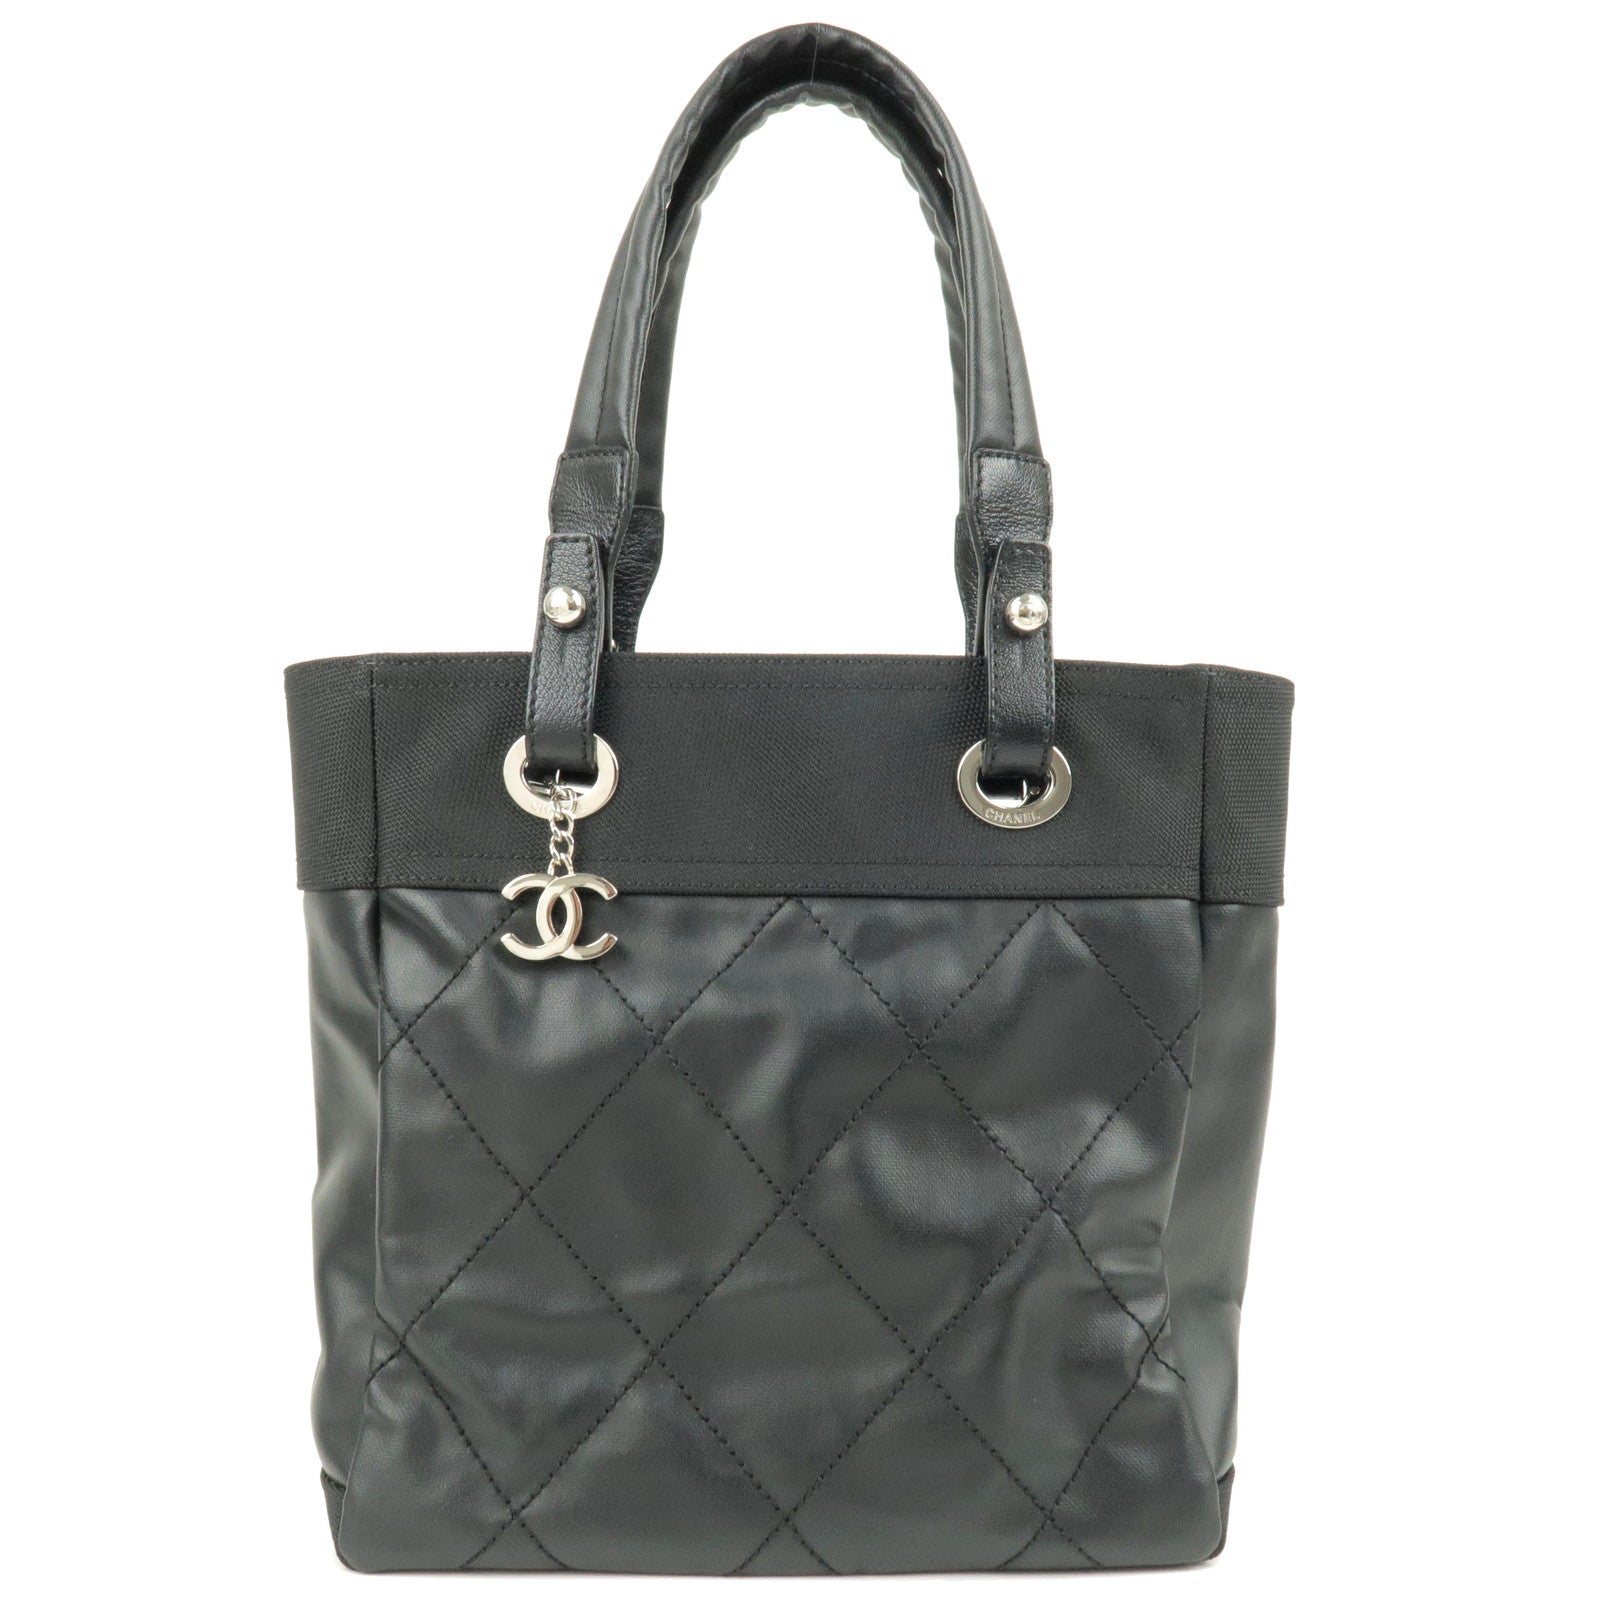 Chanel Silver Quilted Coated Canvas Paris-Biarritz Petite Shopping Tote Bag  - Yoogi's Closet